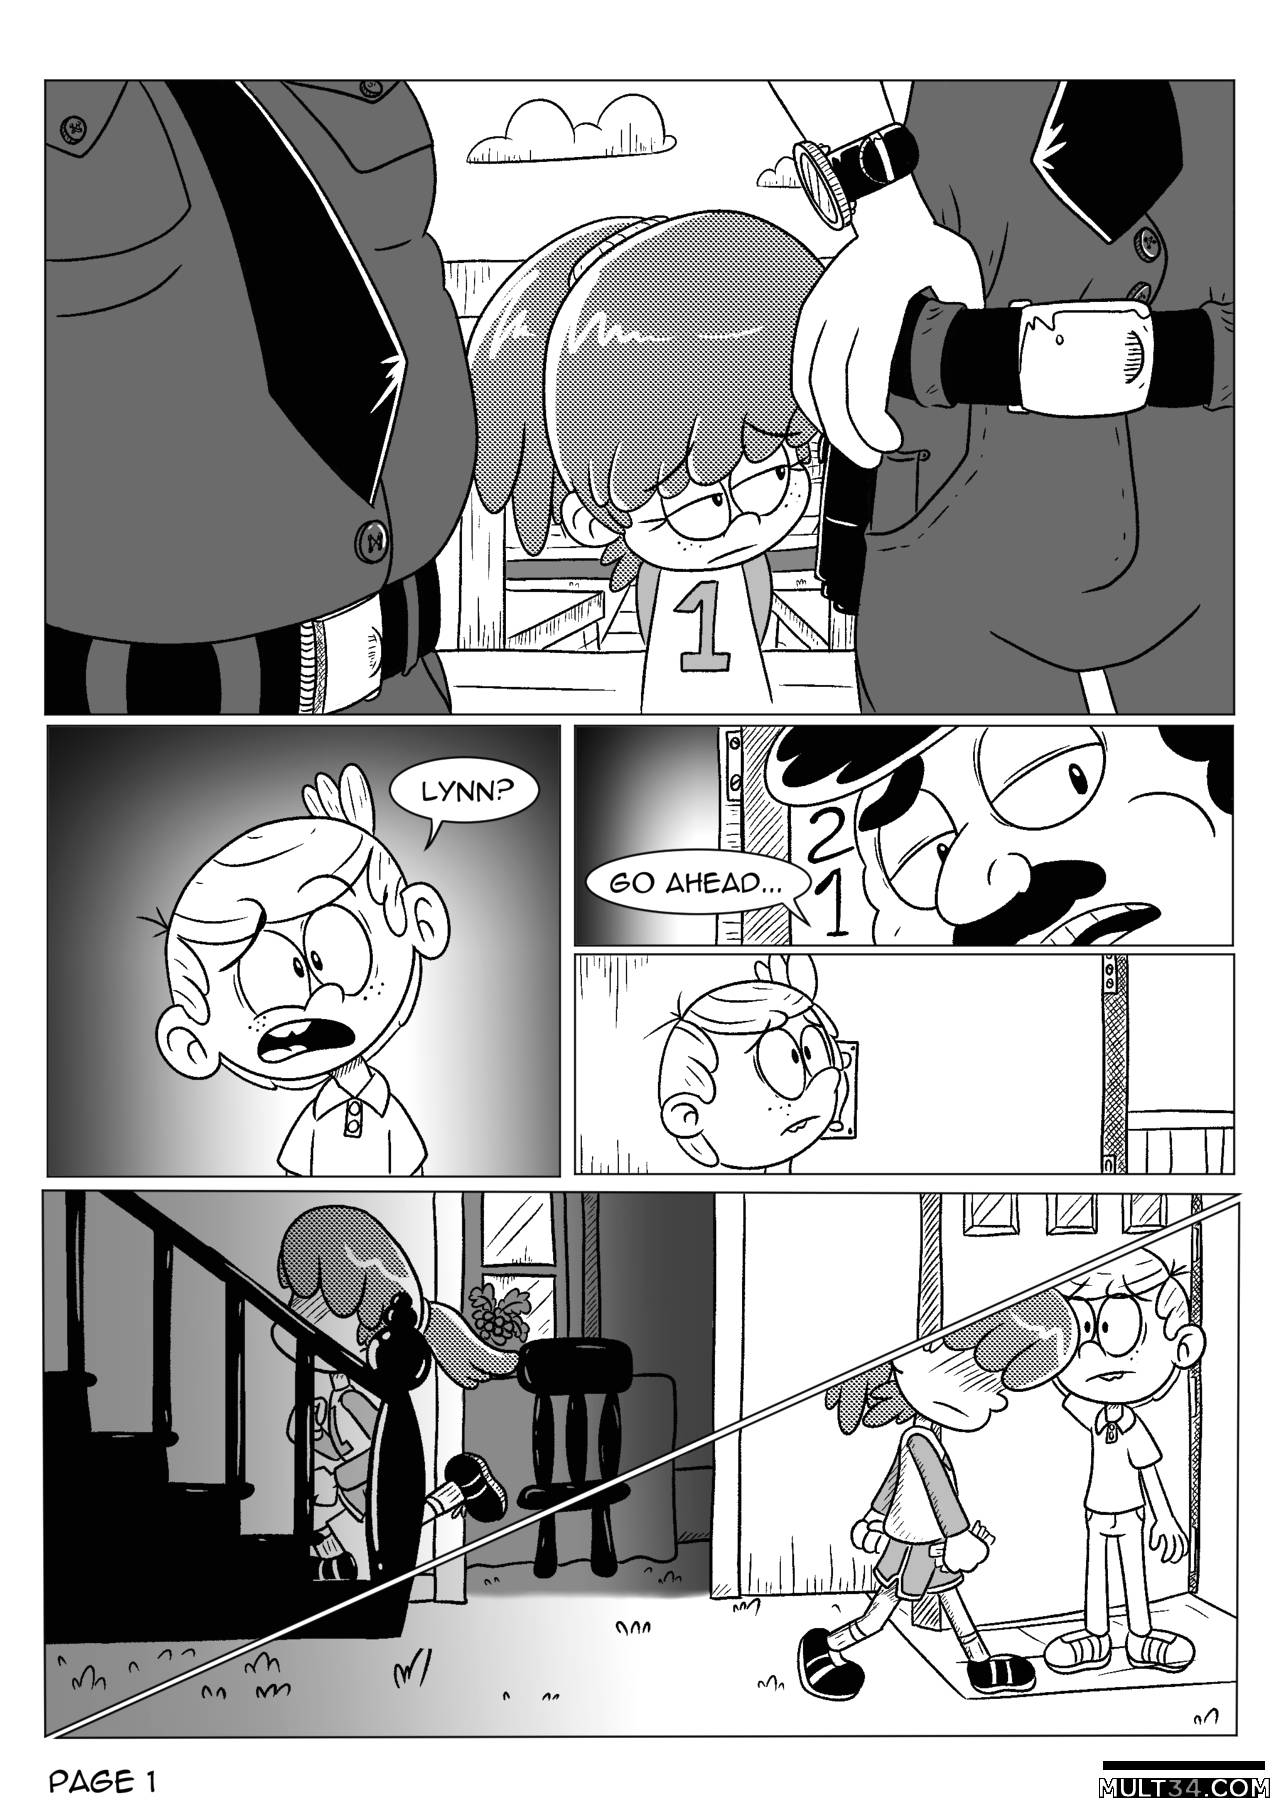 The loud house comic, chapter 3 page 2